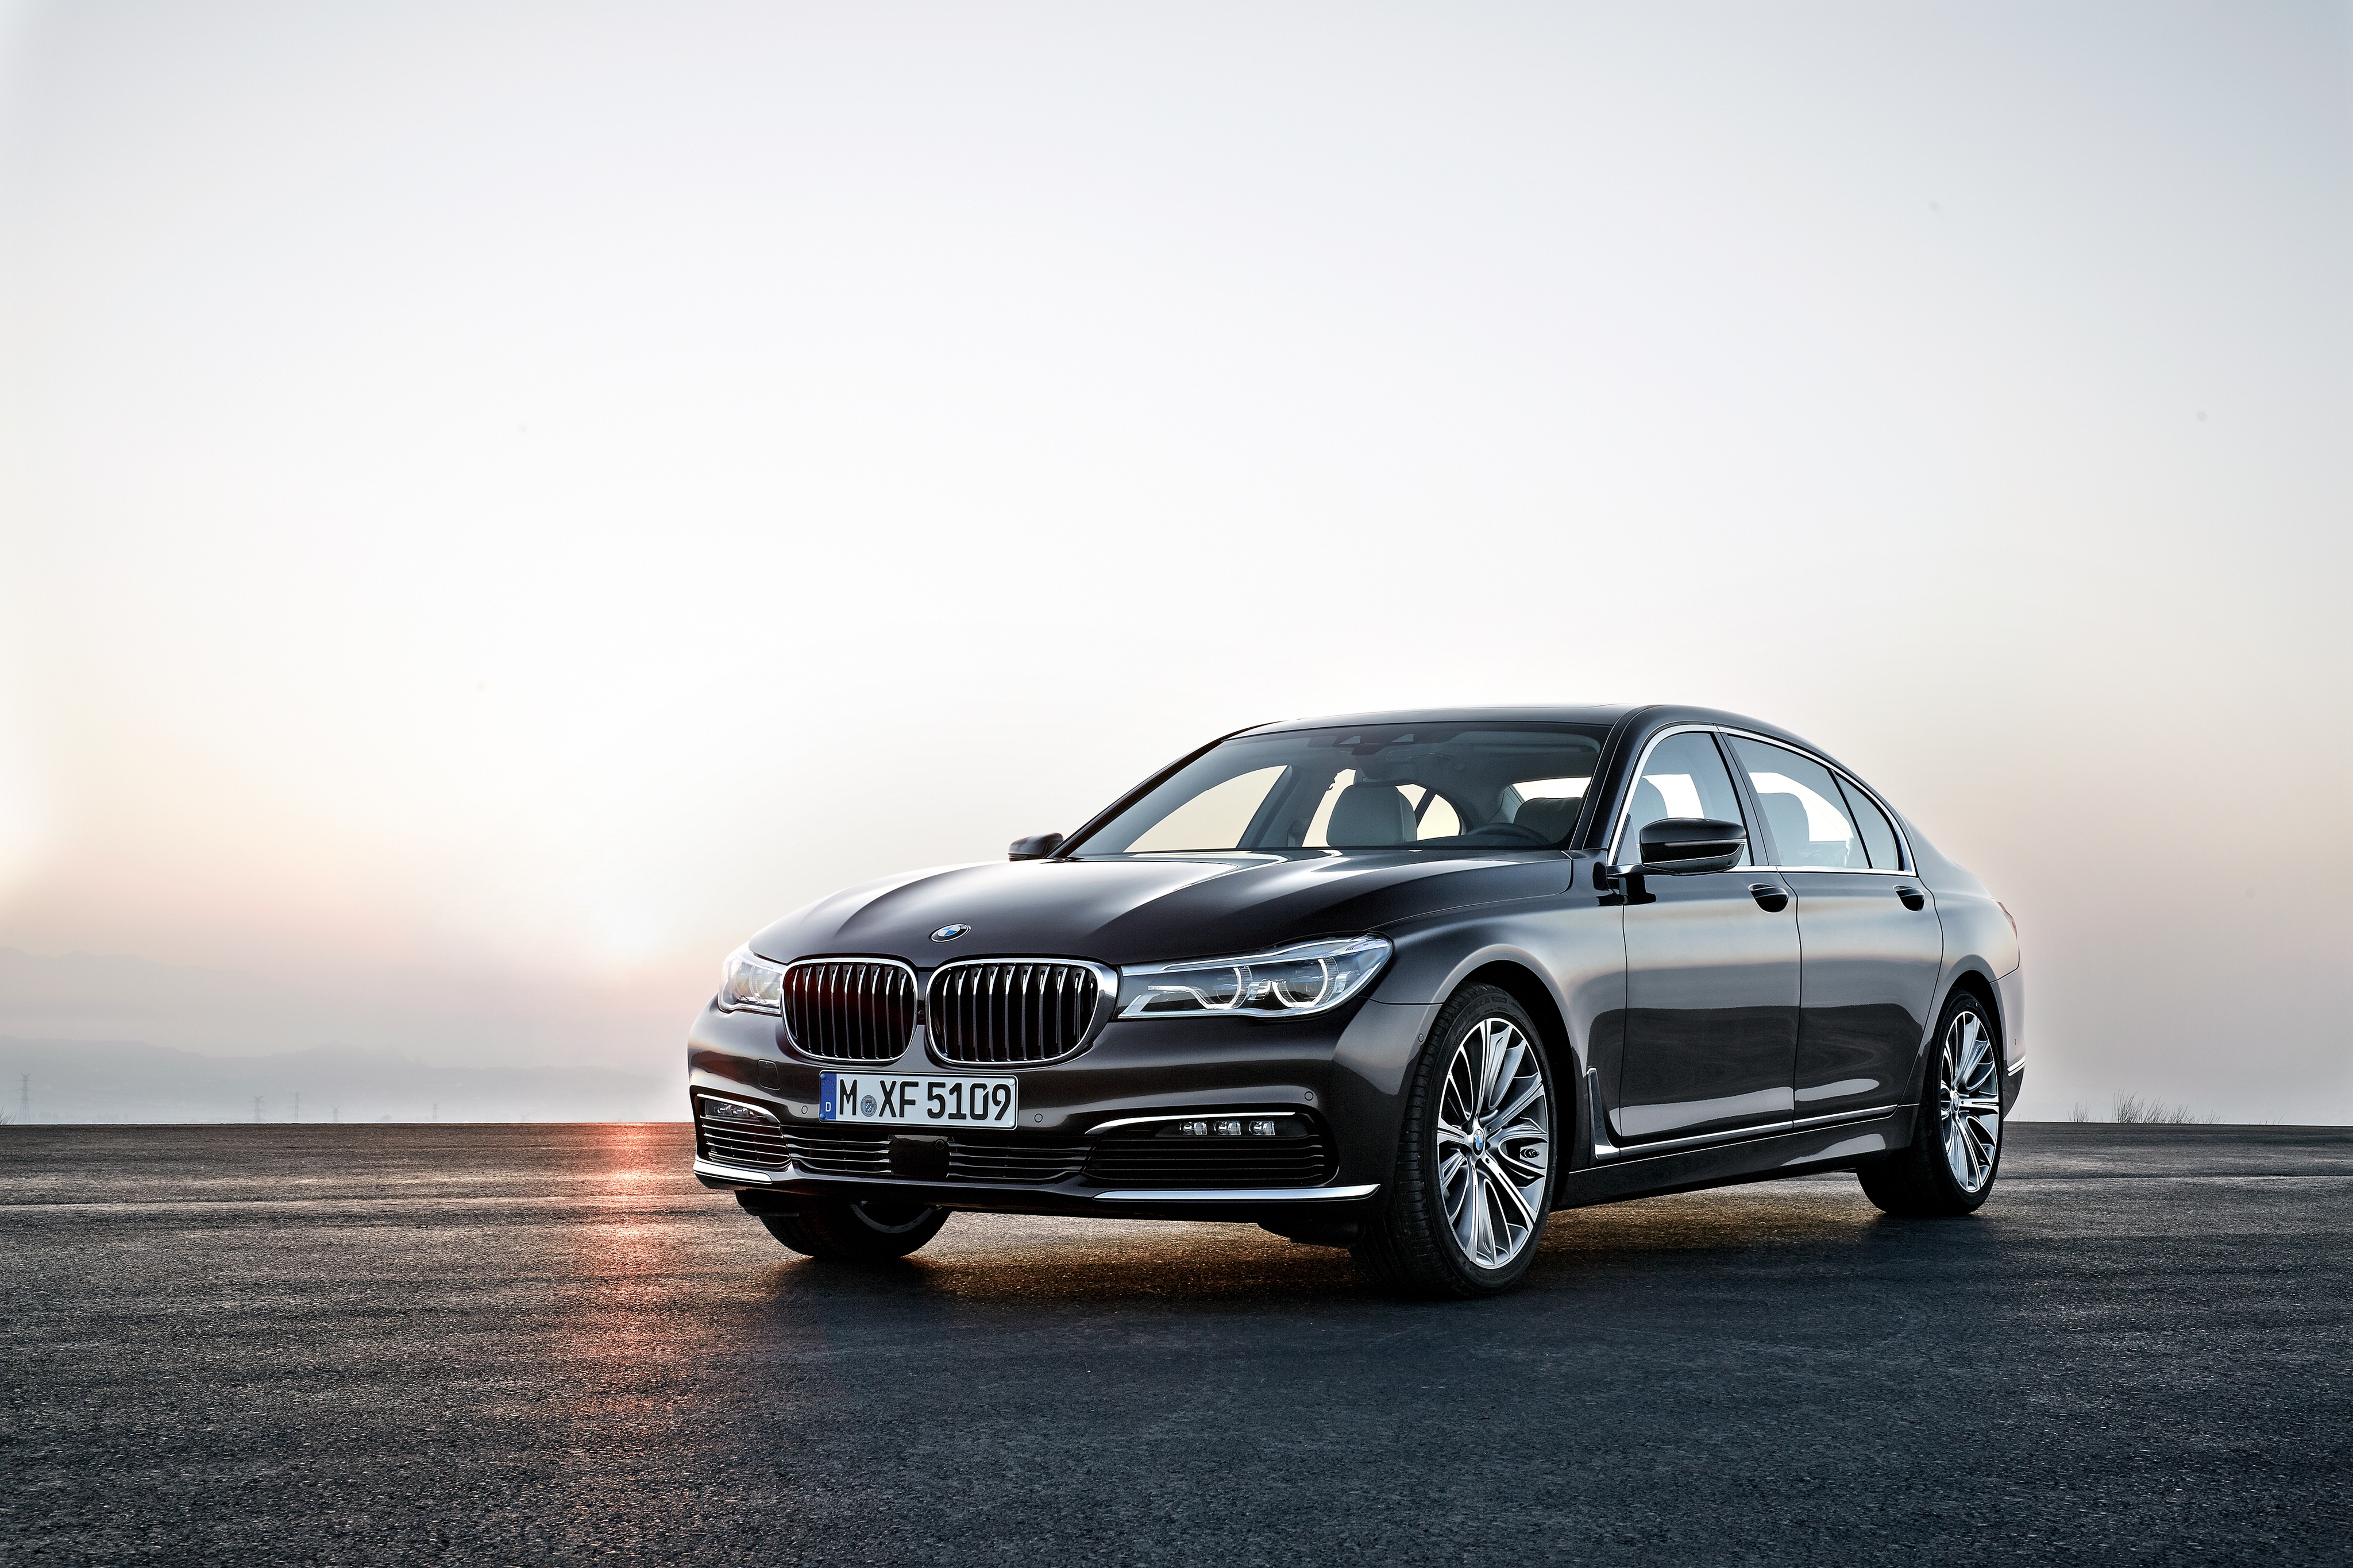 Free photo A picture of a bmw 7 series